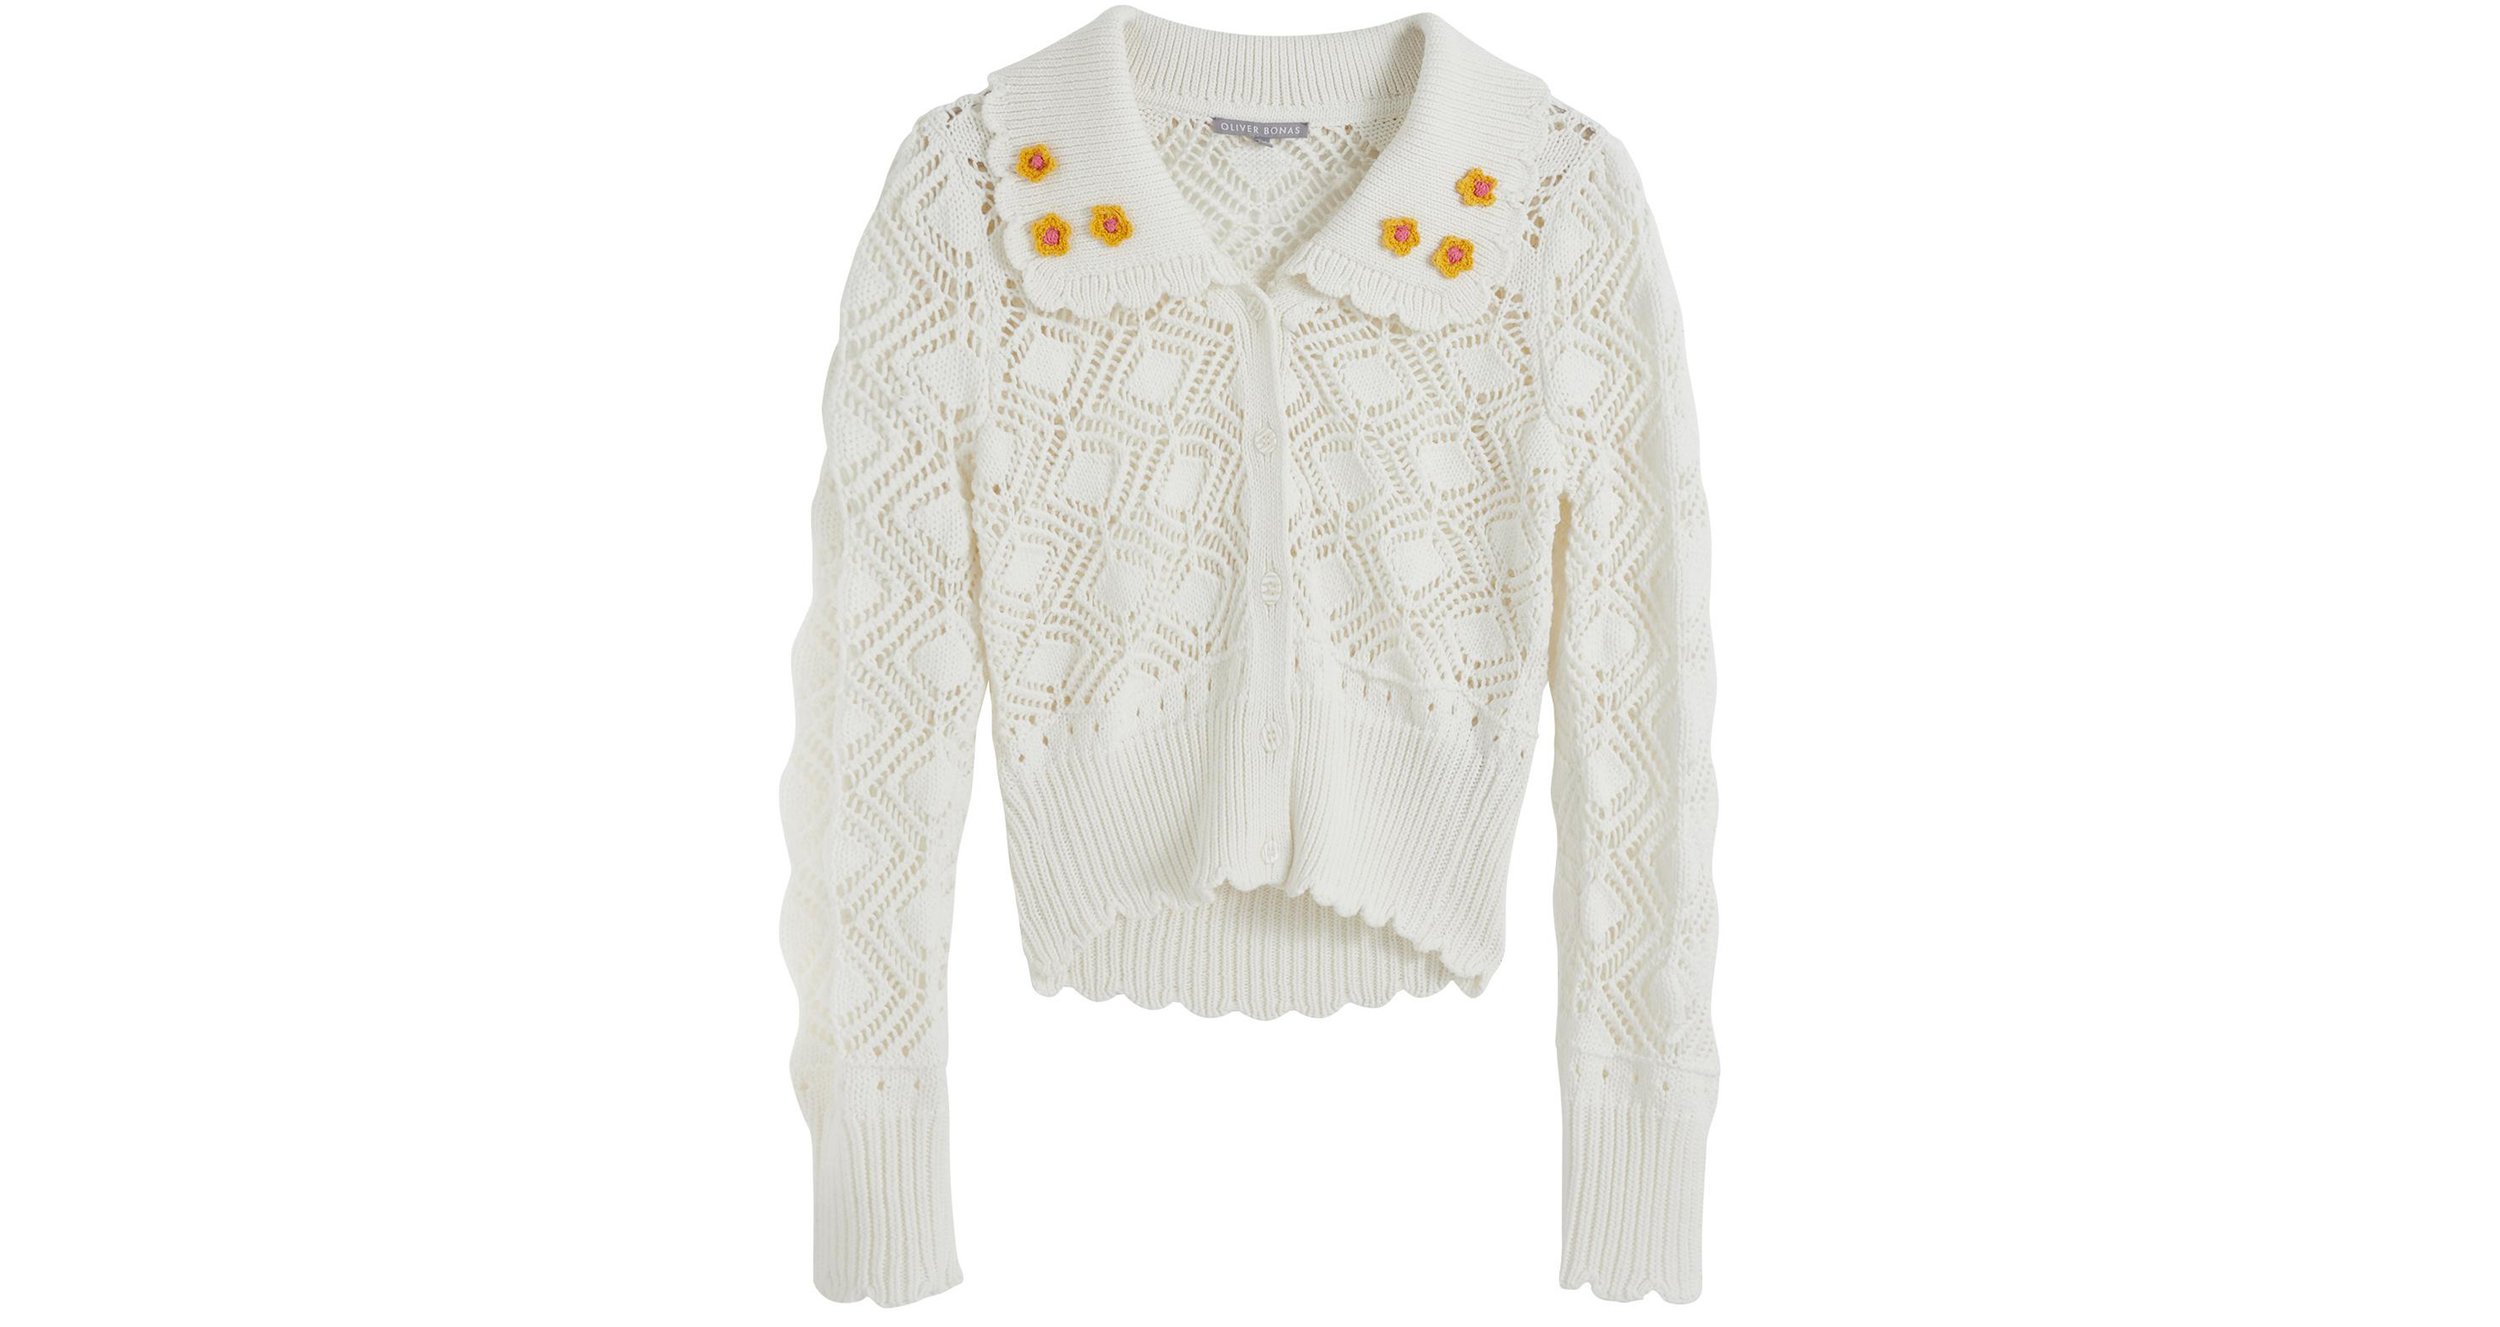 1 Oliver Bonas Floral Collar Button Ivory Knitted Cardigan €66, 